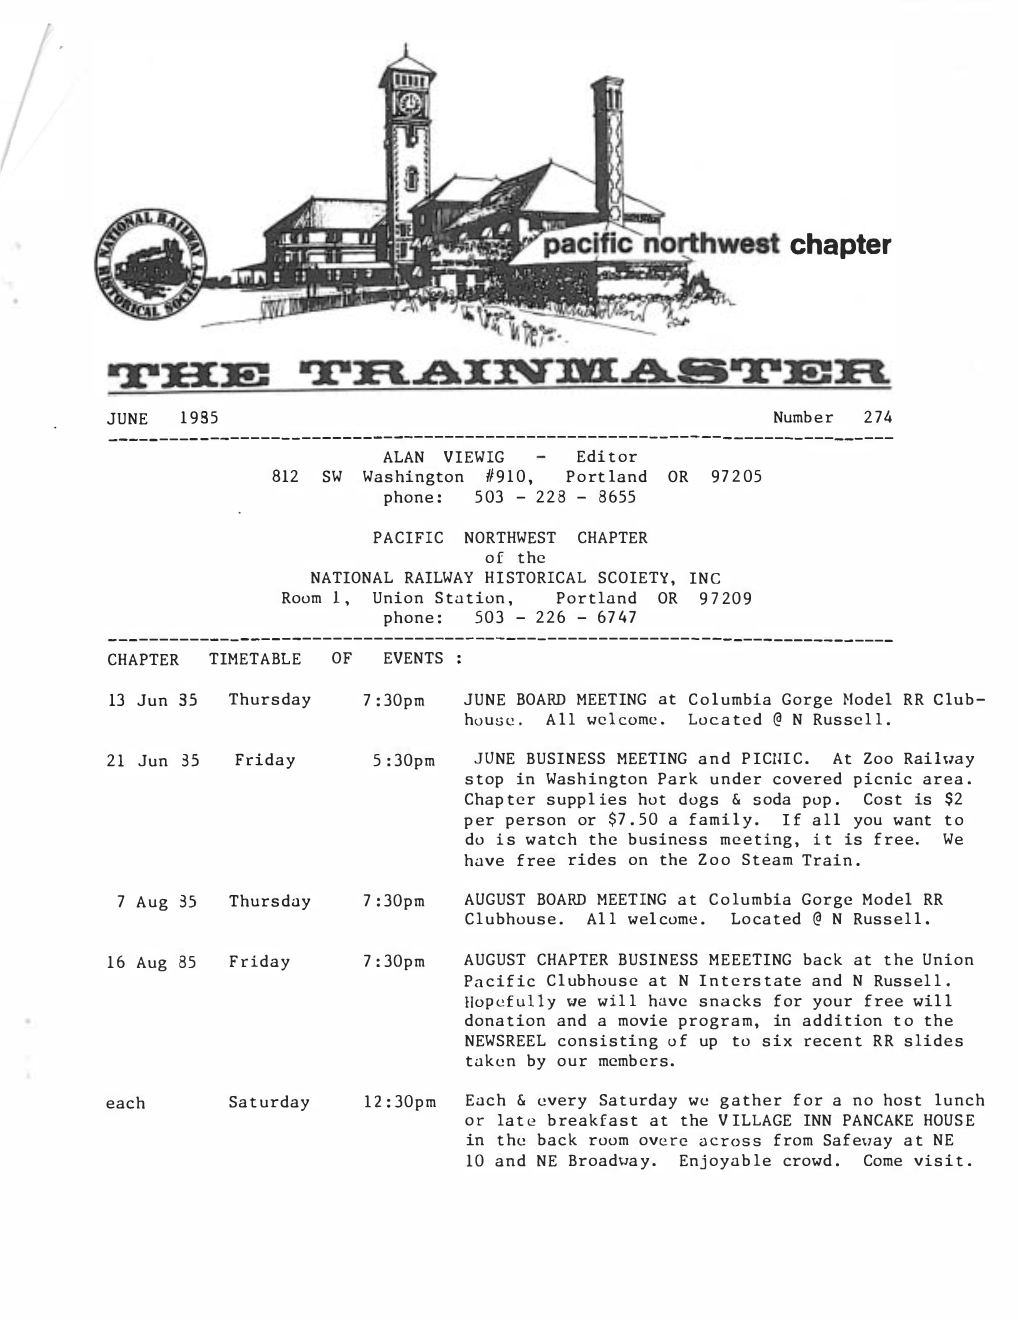 THE Trainmaster JUNE 1985